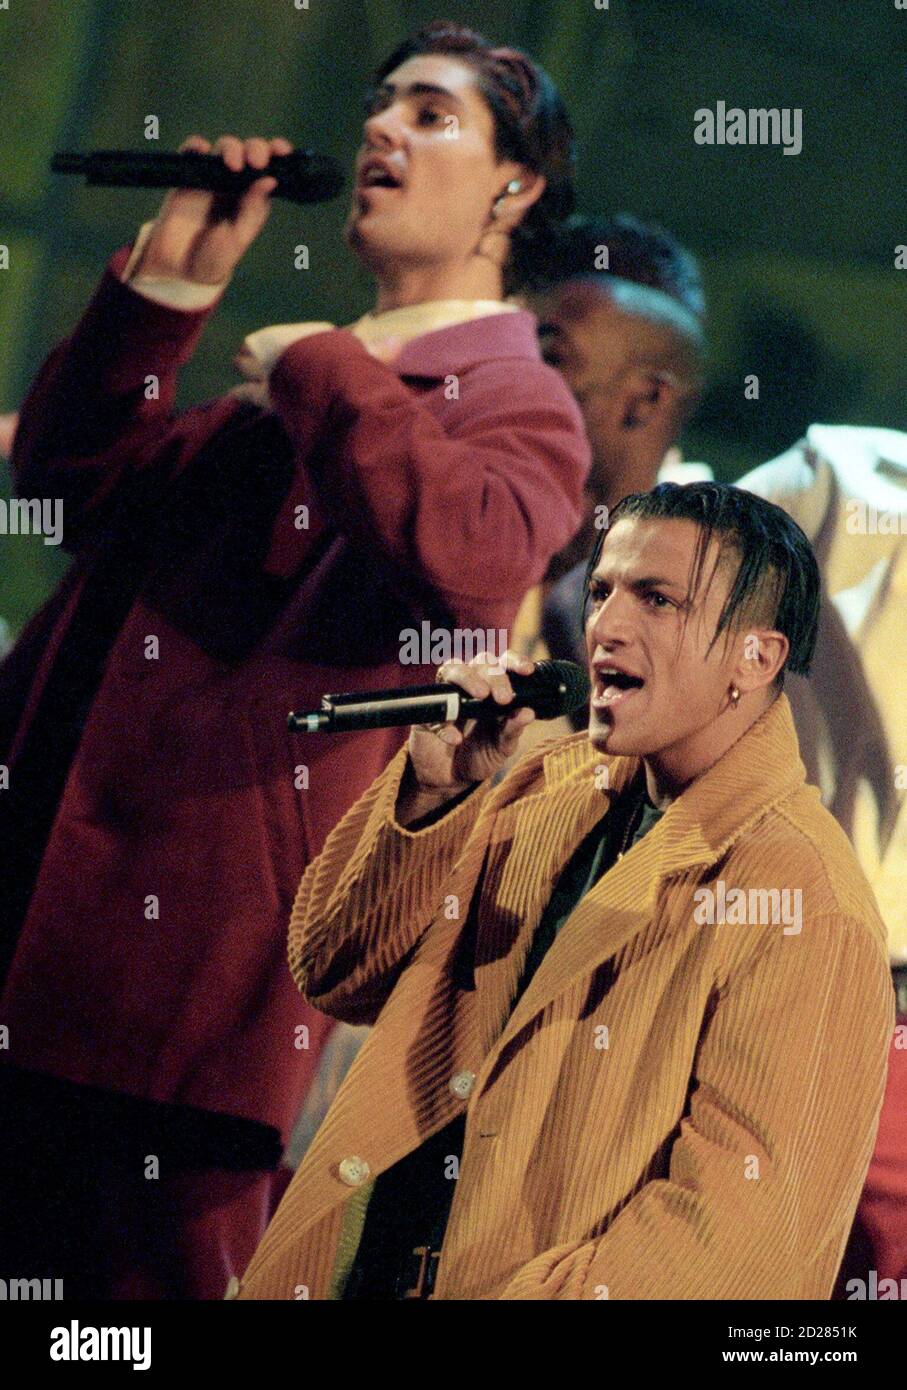 Singer Peter Andre (R) performs with Irish boy band Boyzone at the MTV awards in London November 14,1996. International stars from the world of music, showbusiness and fashion gathered for the gala event.  REUTERS/Ian Waldie  (BRITAIN) Stock Photo